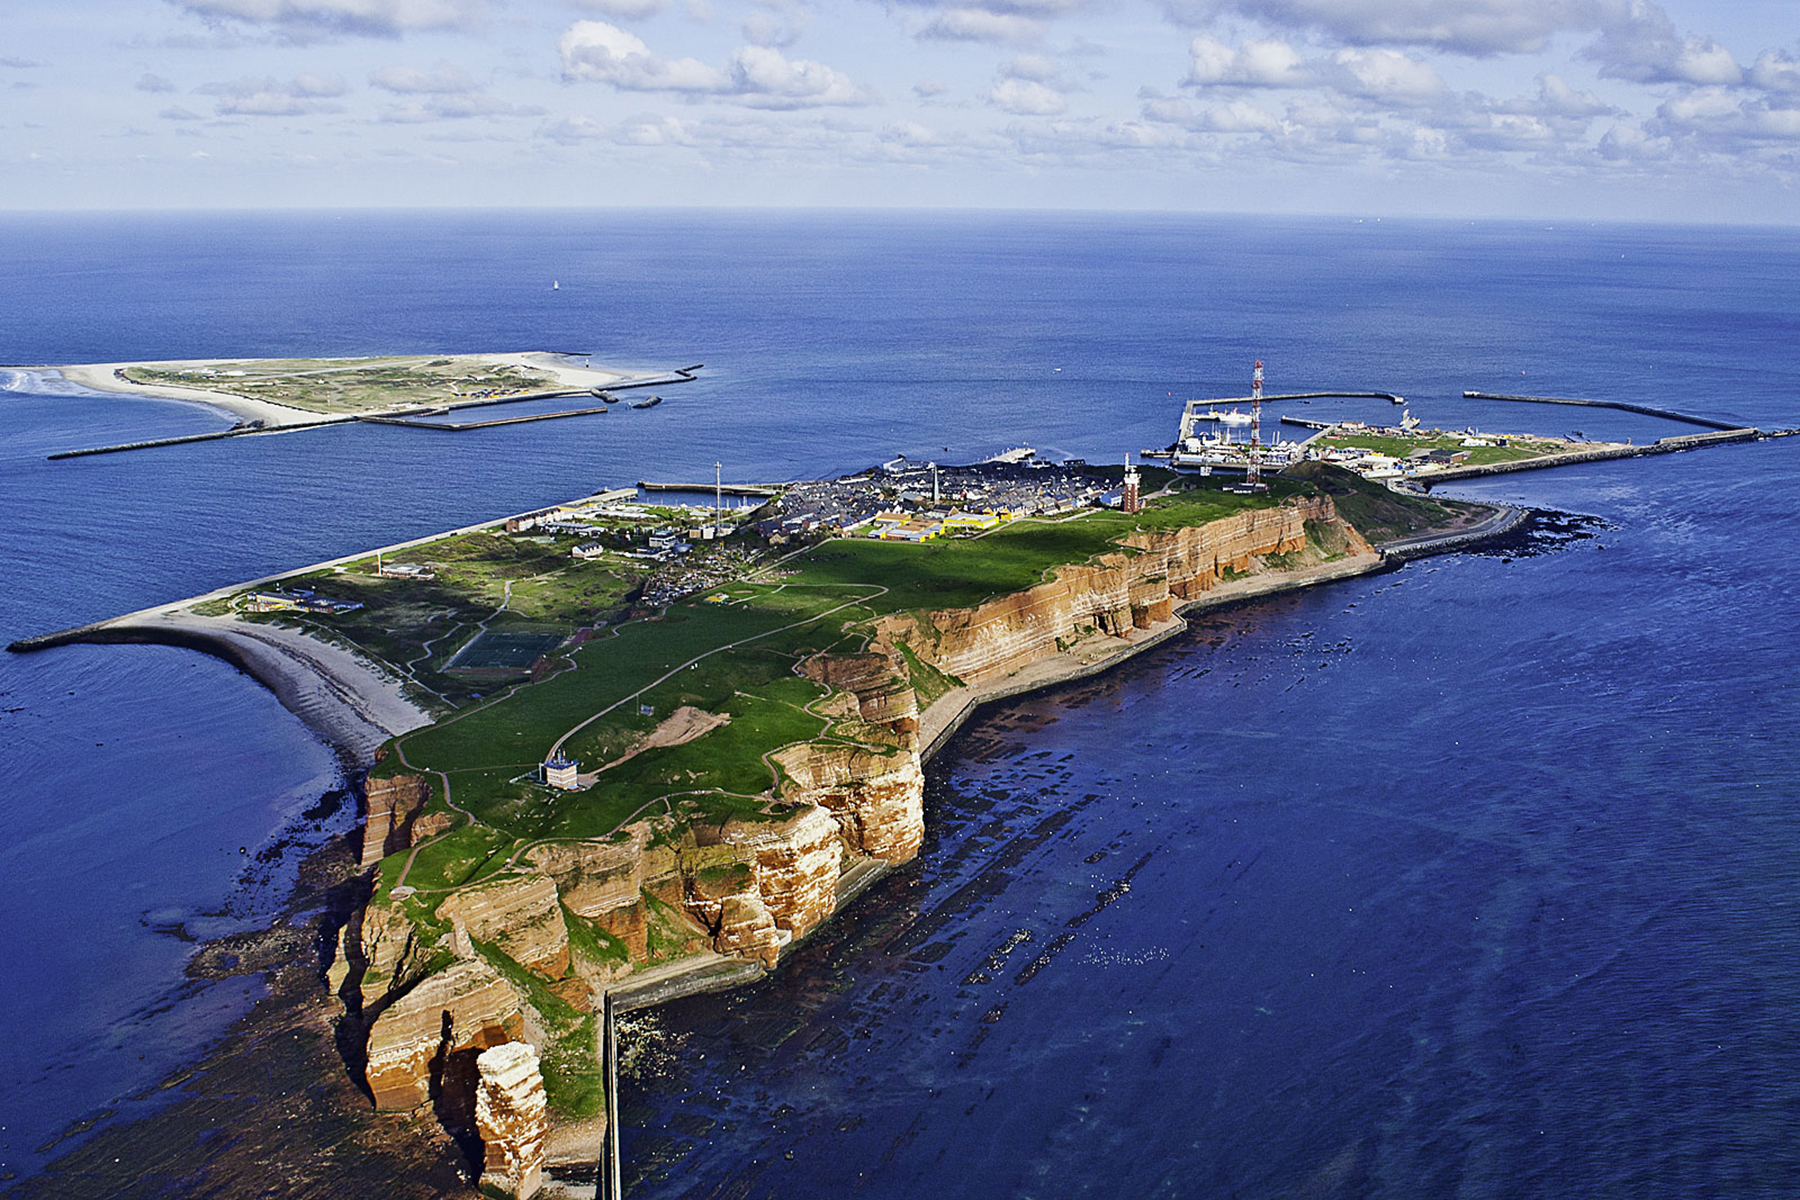 Heligoland is the name used by ancient writers for the island Abalus or Basileia German Bight